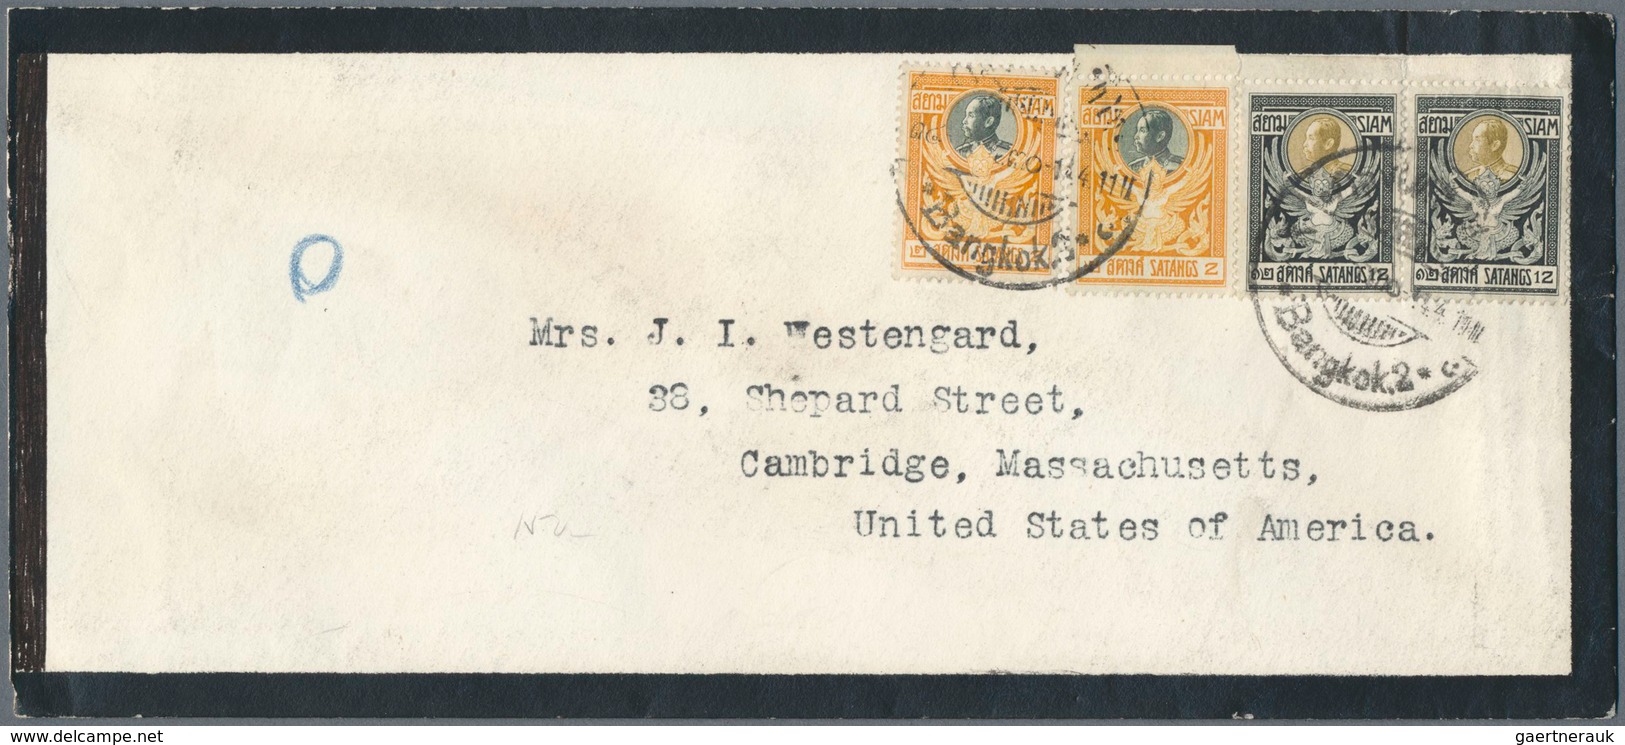 09946 Thailand: 1911 Mourning Cover From Bangkok To Cambridge, Mass., USA Franked By Two Singles Of Both 1 - Thailand